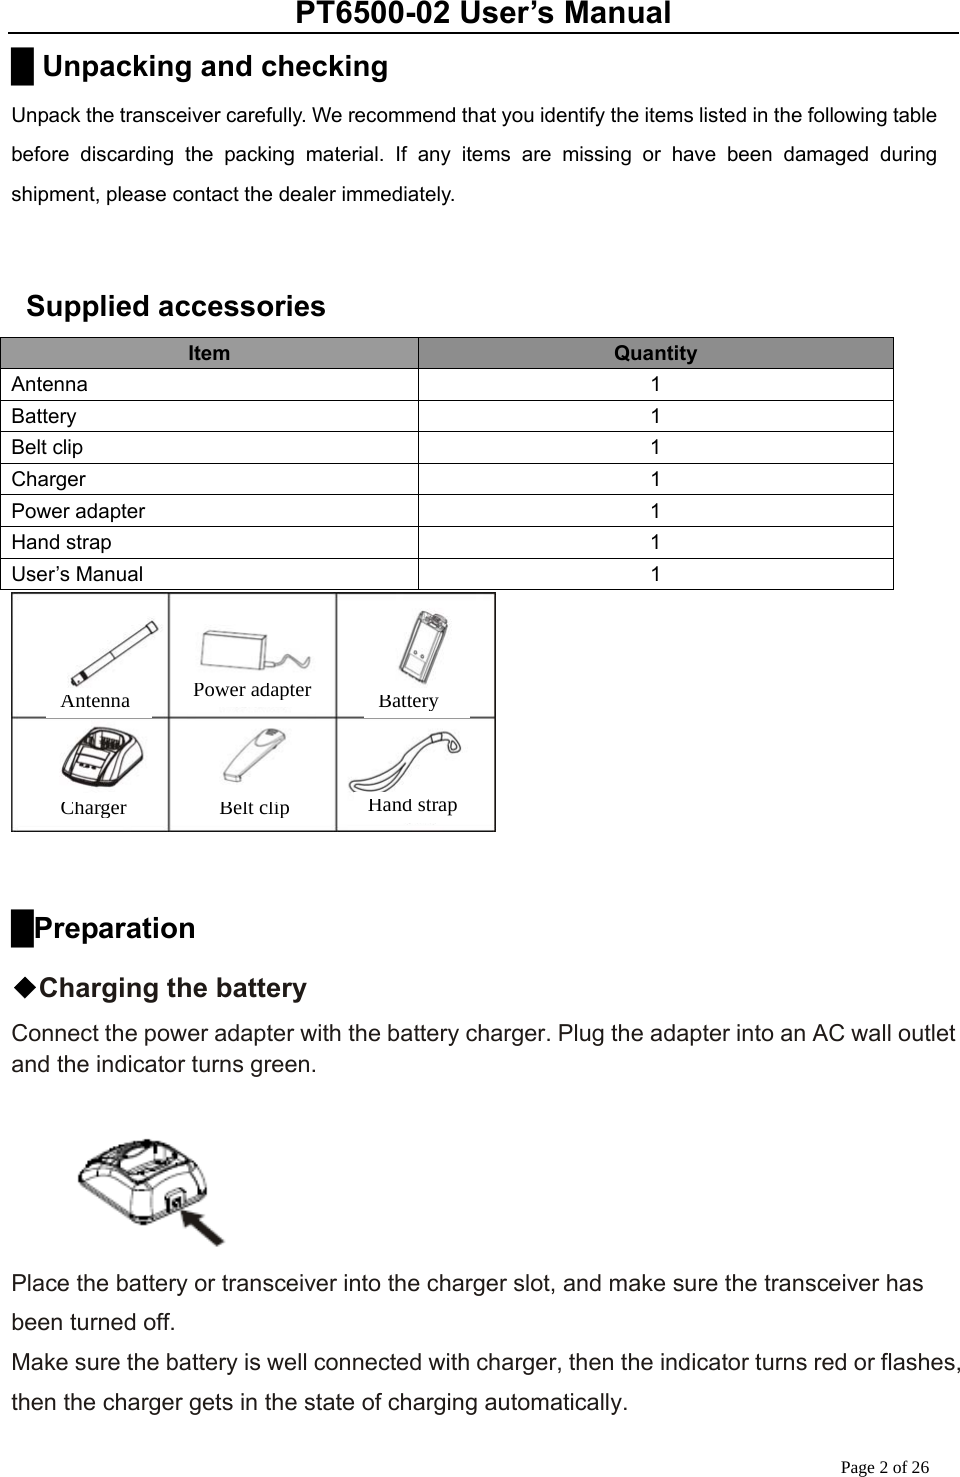 PT6500-02 User’s Manual Page 2 of 26 █ Unpacking and checking Unpack the transceiver carefully. We recommend that you identify the items listed in the following table before discarding the packing material. If any items are missing or have been damaged during shipment, please contact the dealer immediately.    Supplied accessories Item  Quantity Antenna 1 Battery 1 Belt clip  1 Charger 1 Power adapter  1 Hand strap  1 User’s Manual  1   █Preparation ◆Charging the battery Connect the power adapter with the battery charger. Plug the adapter into an AC wall outlet and the indicator turns green.   Place the battery or transceiver into the charger slot, and make sure the transceiver has been turned off.   Make sure the battery is well connected with charger, then the indicator turns red or flashes, then the charger gets in the state of charging automatically. Antenna Power adapter BatteryCharger Belt clip Hand strap